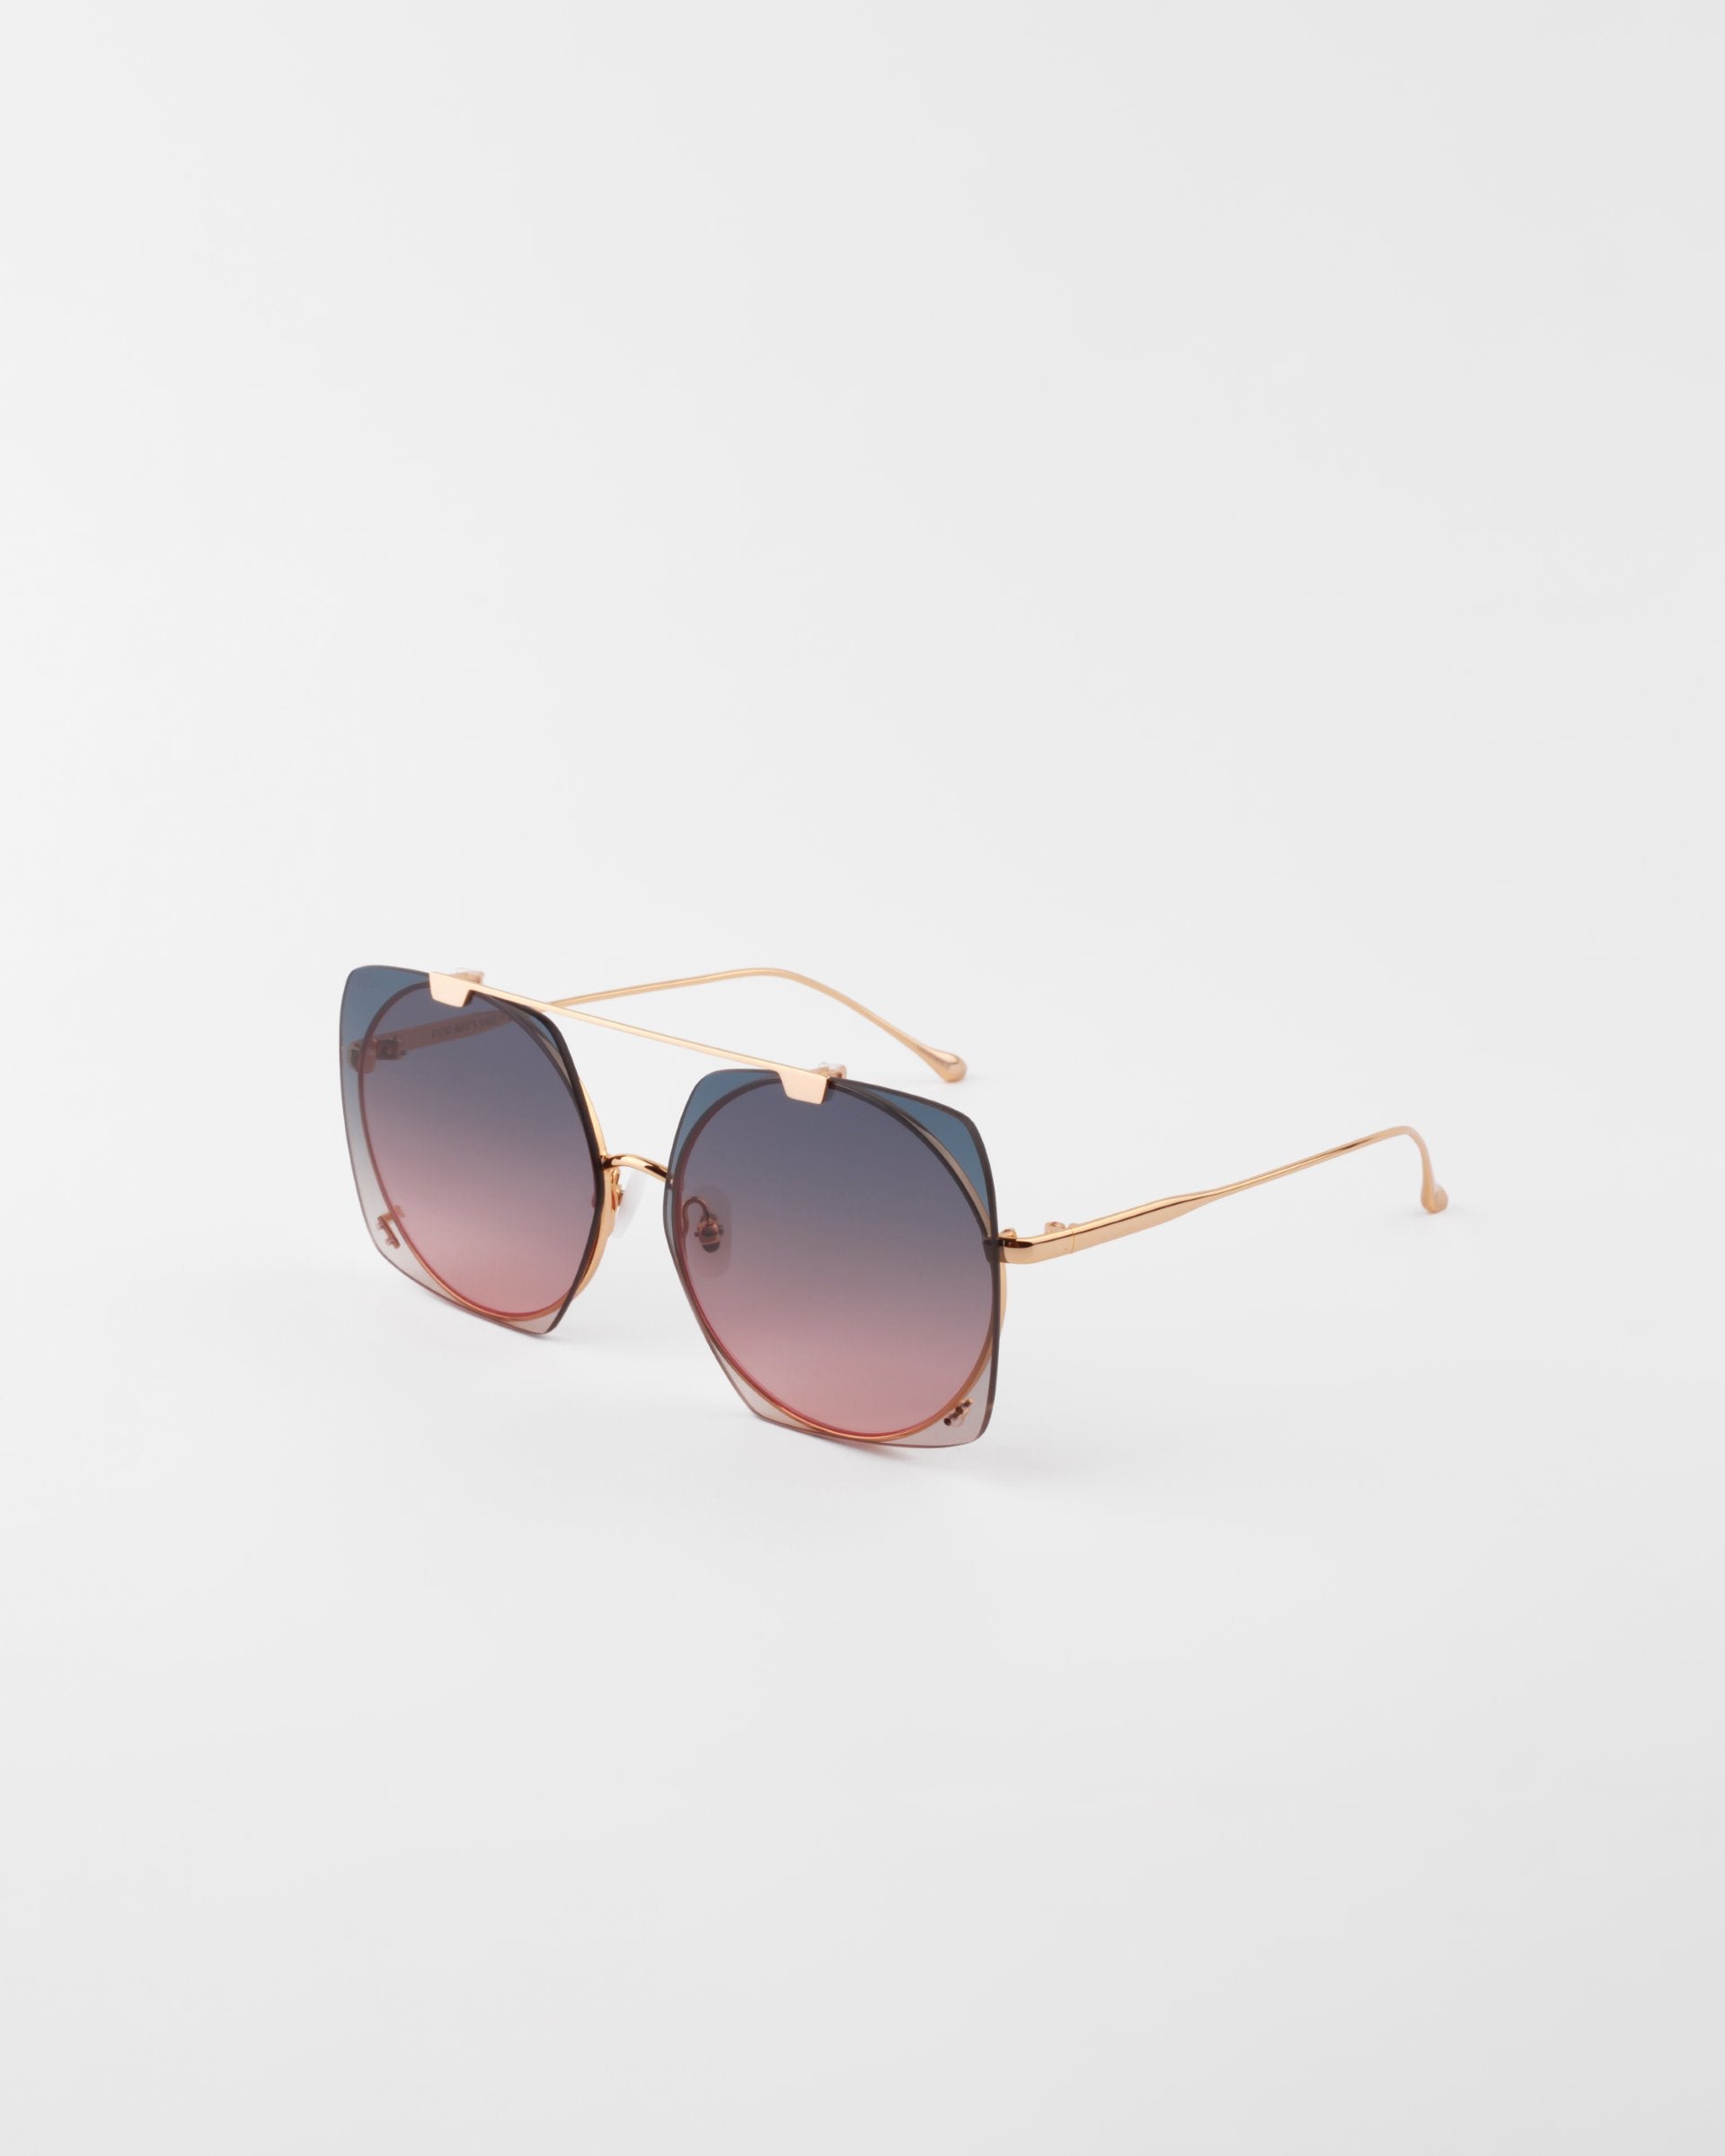 A pair of stylish For Art&#39;s Sake® Last Summer, 18-karat gold-plated sunglasses with thin frames and gradient lenses that transition from dark at the top to lighter at the bottom. The UVA &amp; UVB-protected lenses have a subtle cat-eye shape. The sunglasses are set against a plain white background.